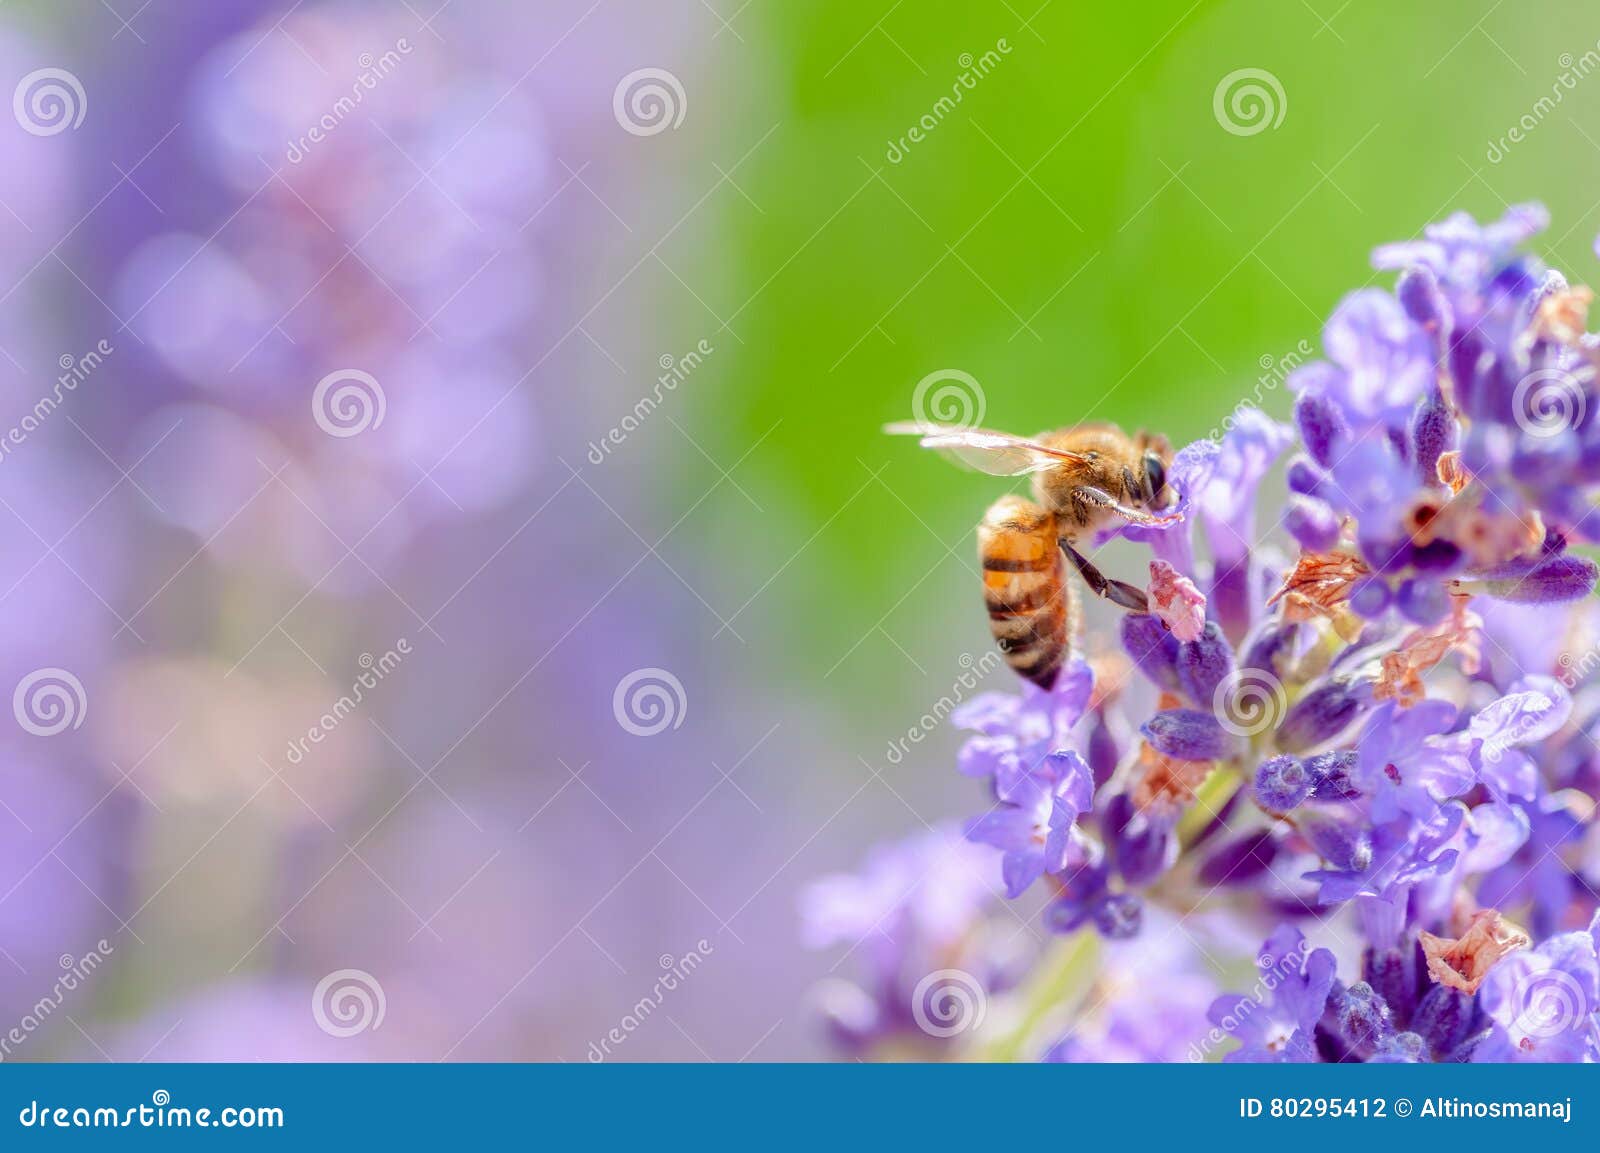 honey bee visiting the lavender flowers and collecting pollen close up pollination